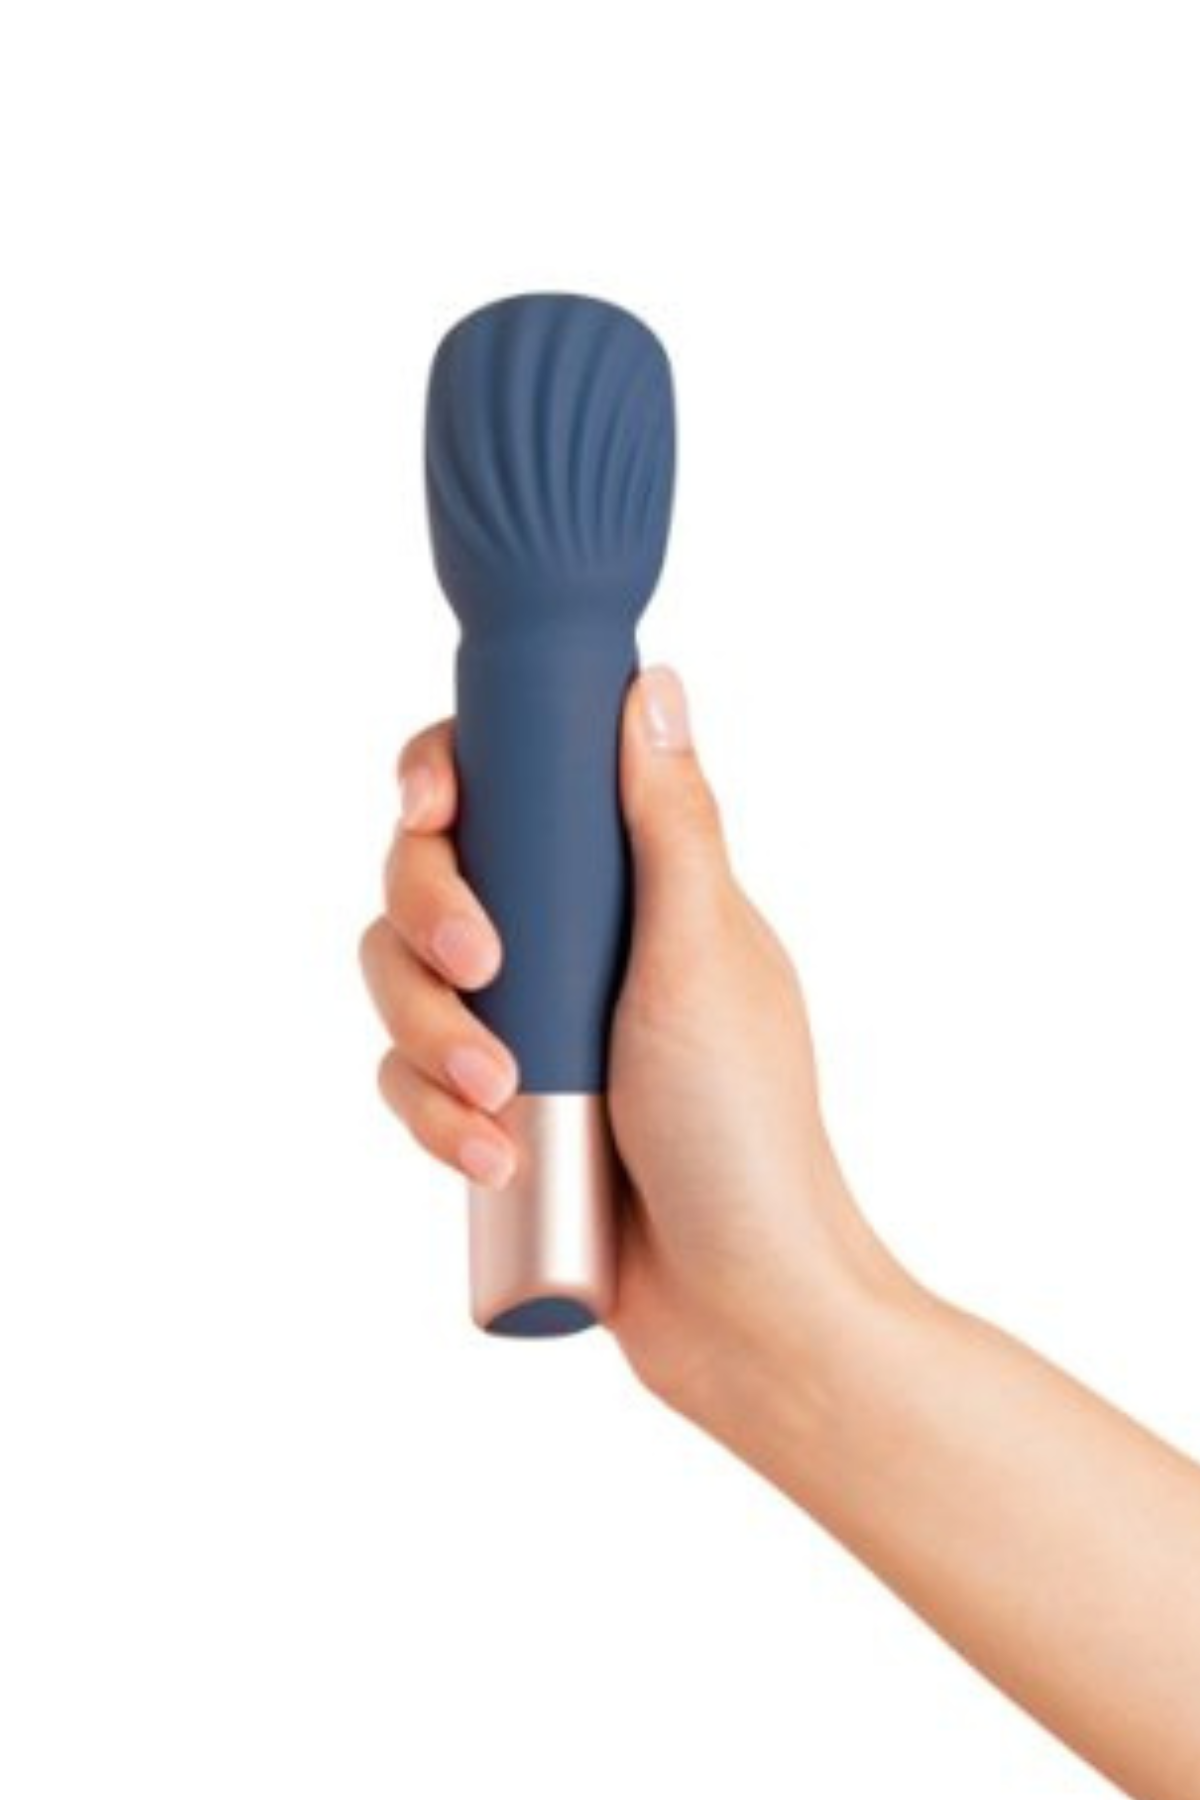 Shop The Wand Body Massager by Deia Online | Matilda's Lifestyle